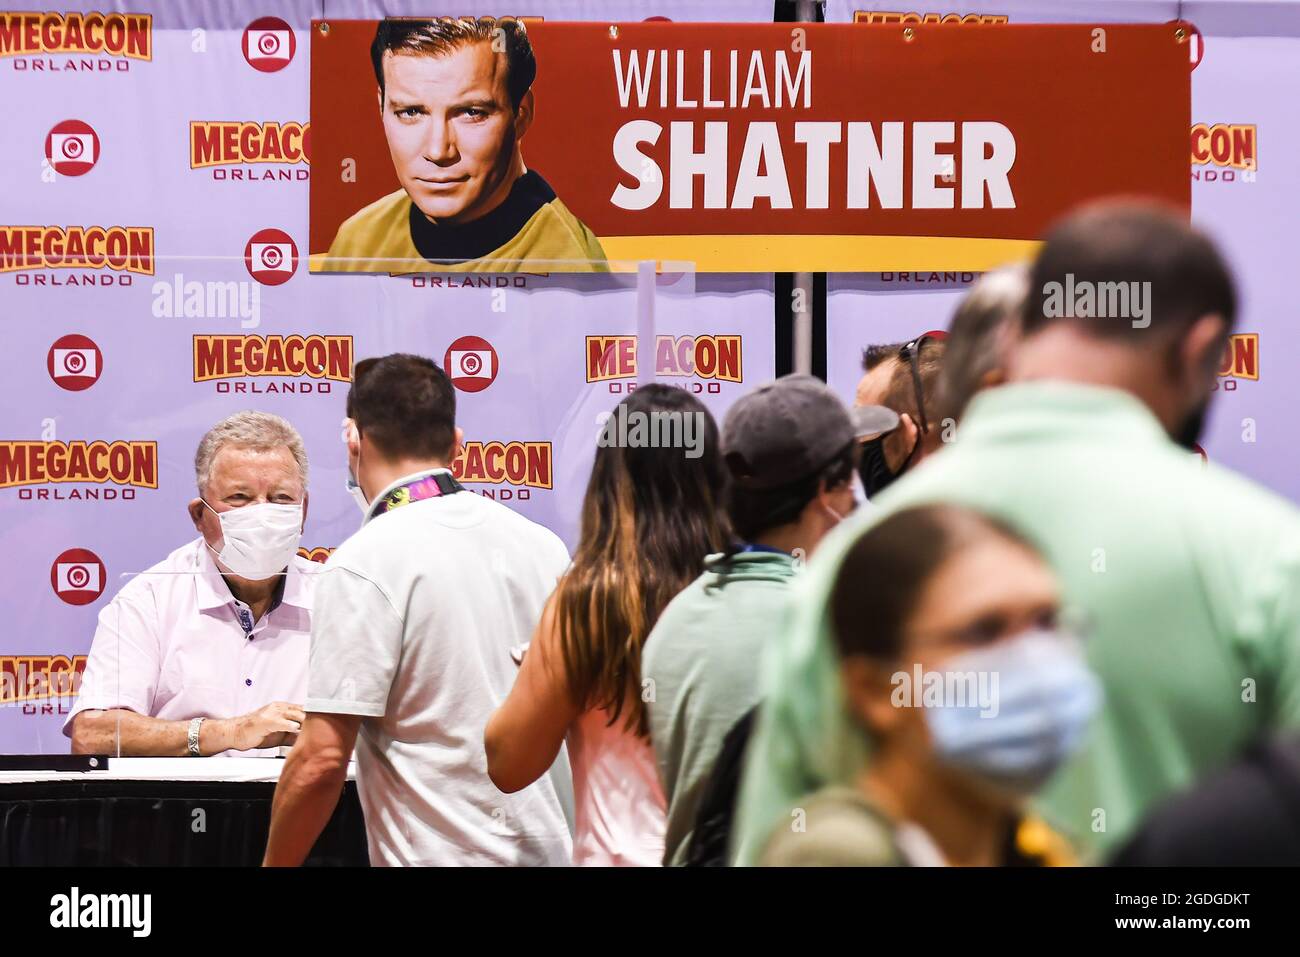 Orlando, United States. 12th Aug, 2021. Actor William Shatner, best known for his portrayal of Captain James T. Kirk of the USS Enterprise in the Star Trek television series and movies, signs autographs for fans on the opening day of MEGACON at the Orange County Convention Center. The 4-day convention caters to the comic book, sci-fi, anime, fantasy, and gaming communities, and features celebrity appearances. Due to the current spike in COVID-19 cases in Florida, all attendees are required to wear face masks. Credit: SOPA Images Limited/Alamy Live News Stock Photo